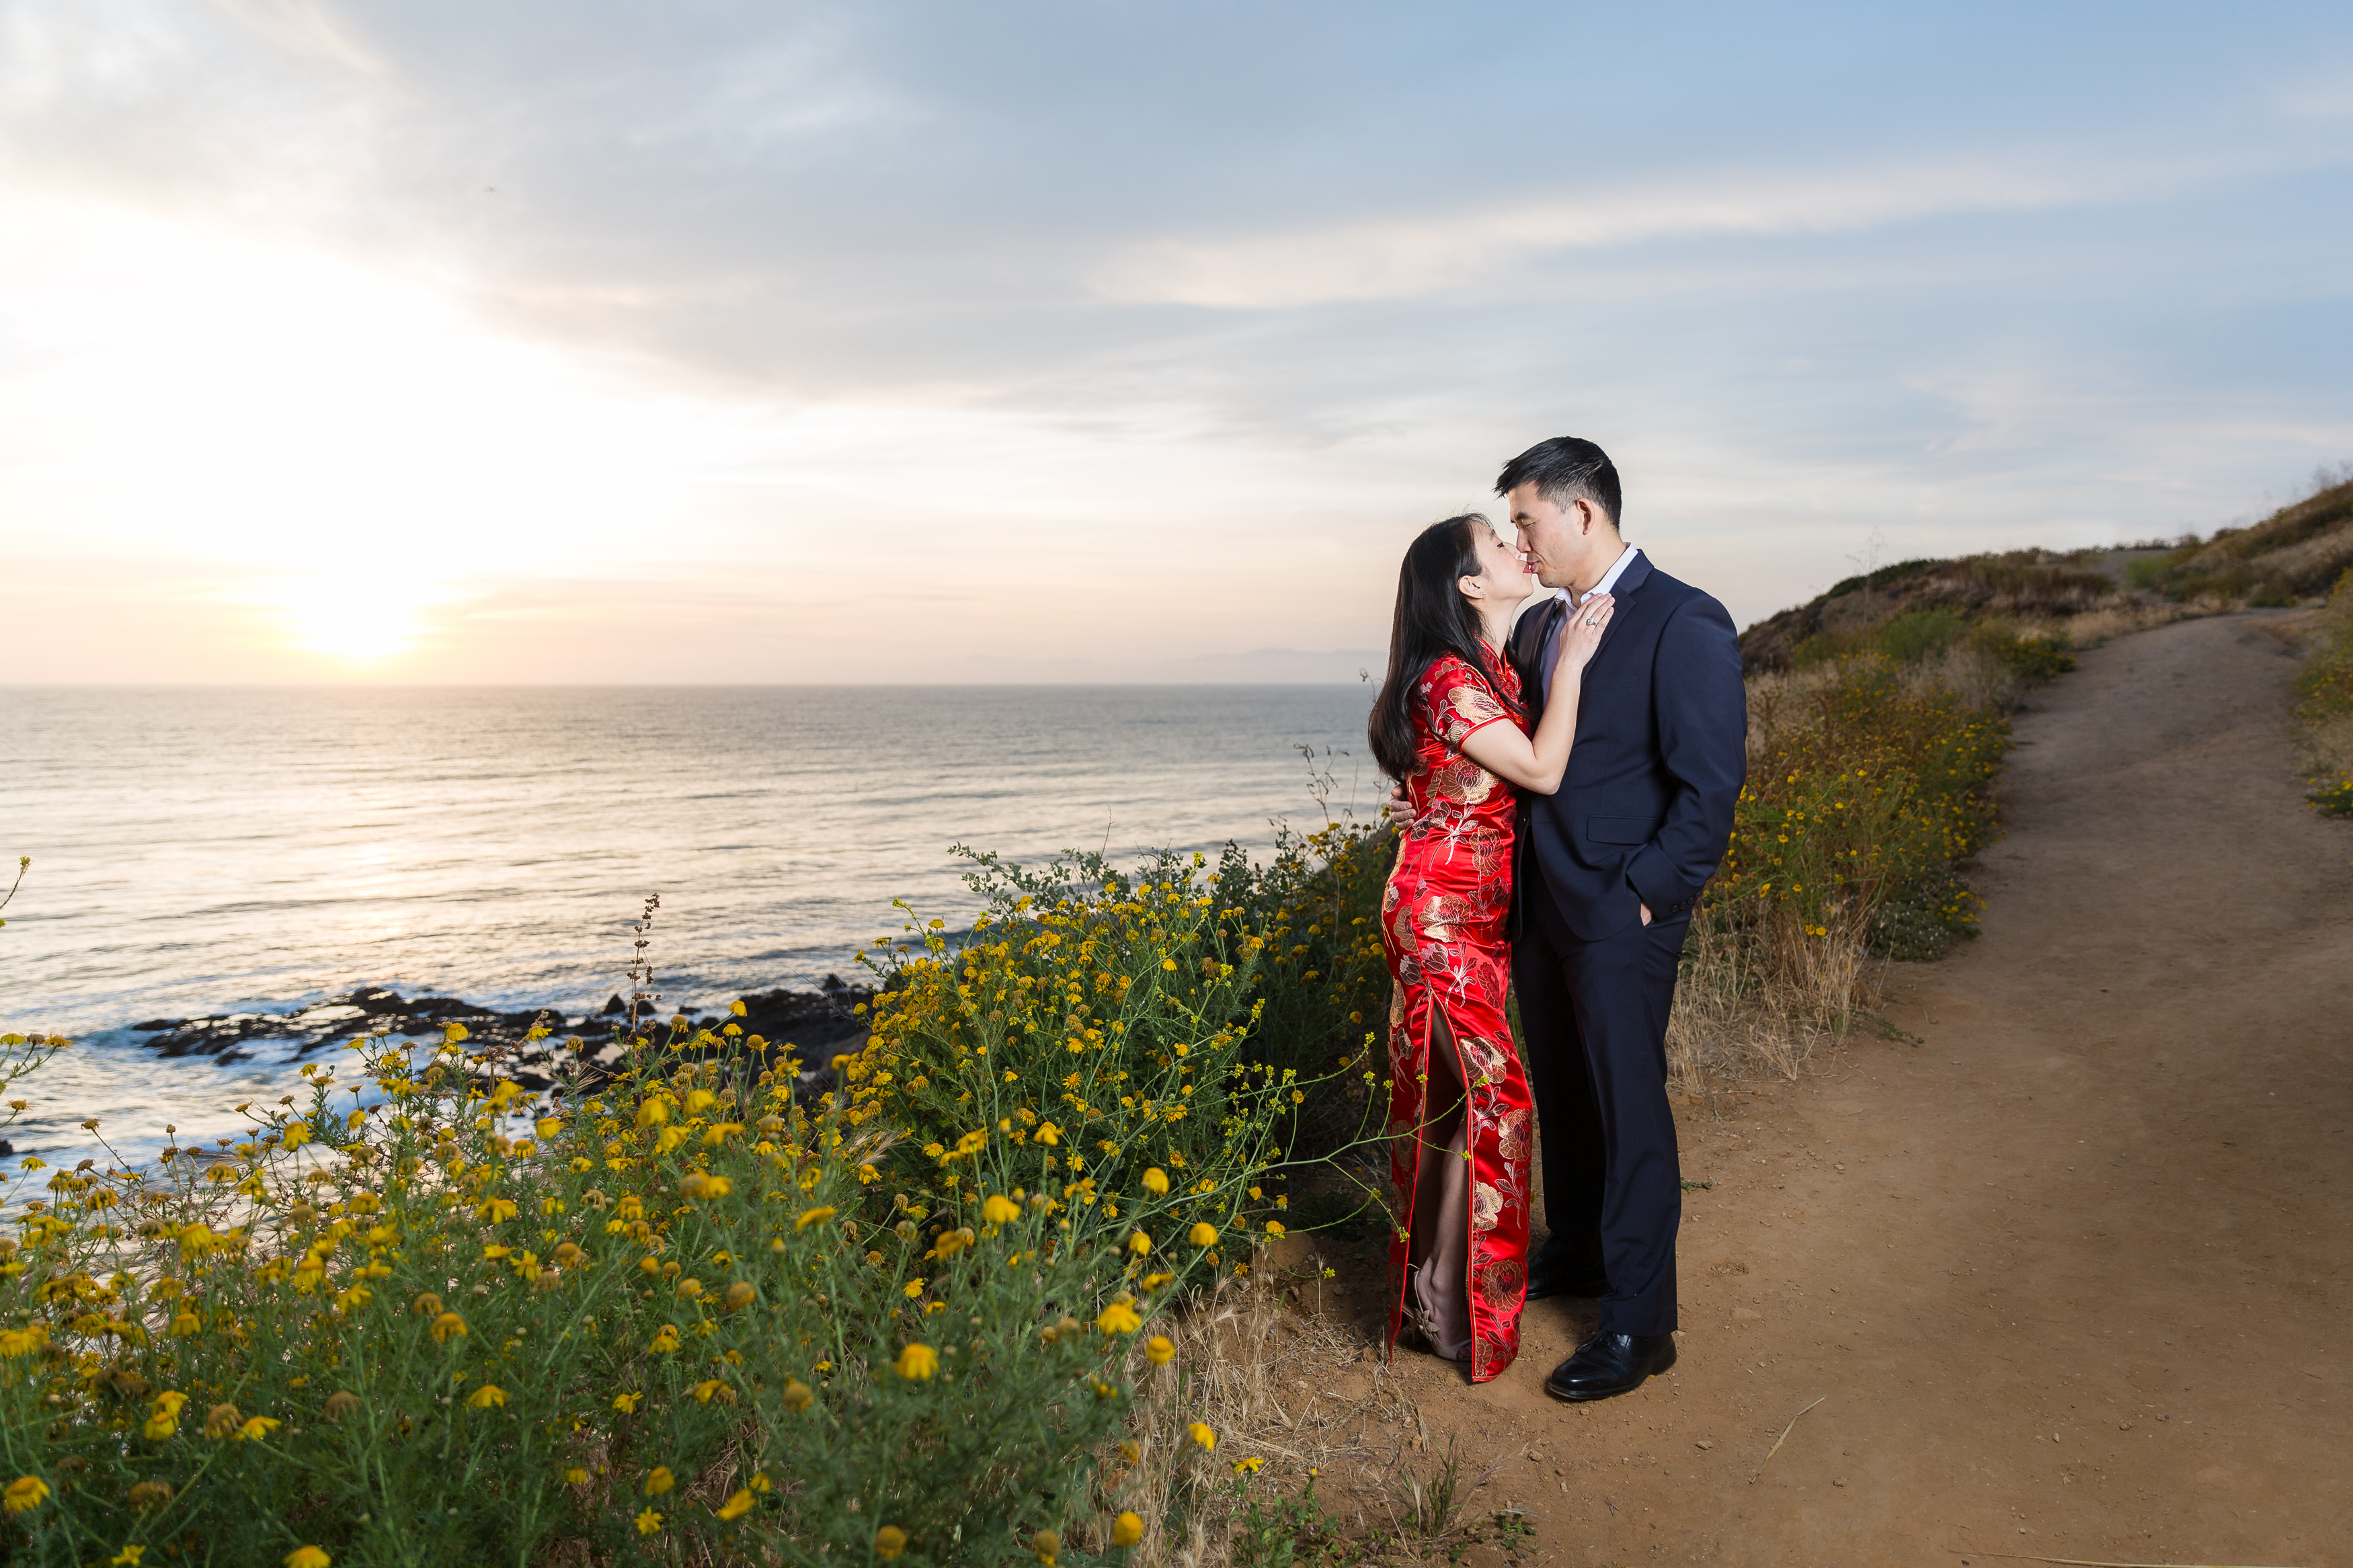 Engaged couple kissing along cliffside at sunset in California